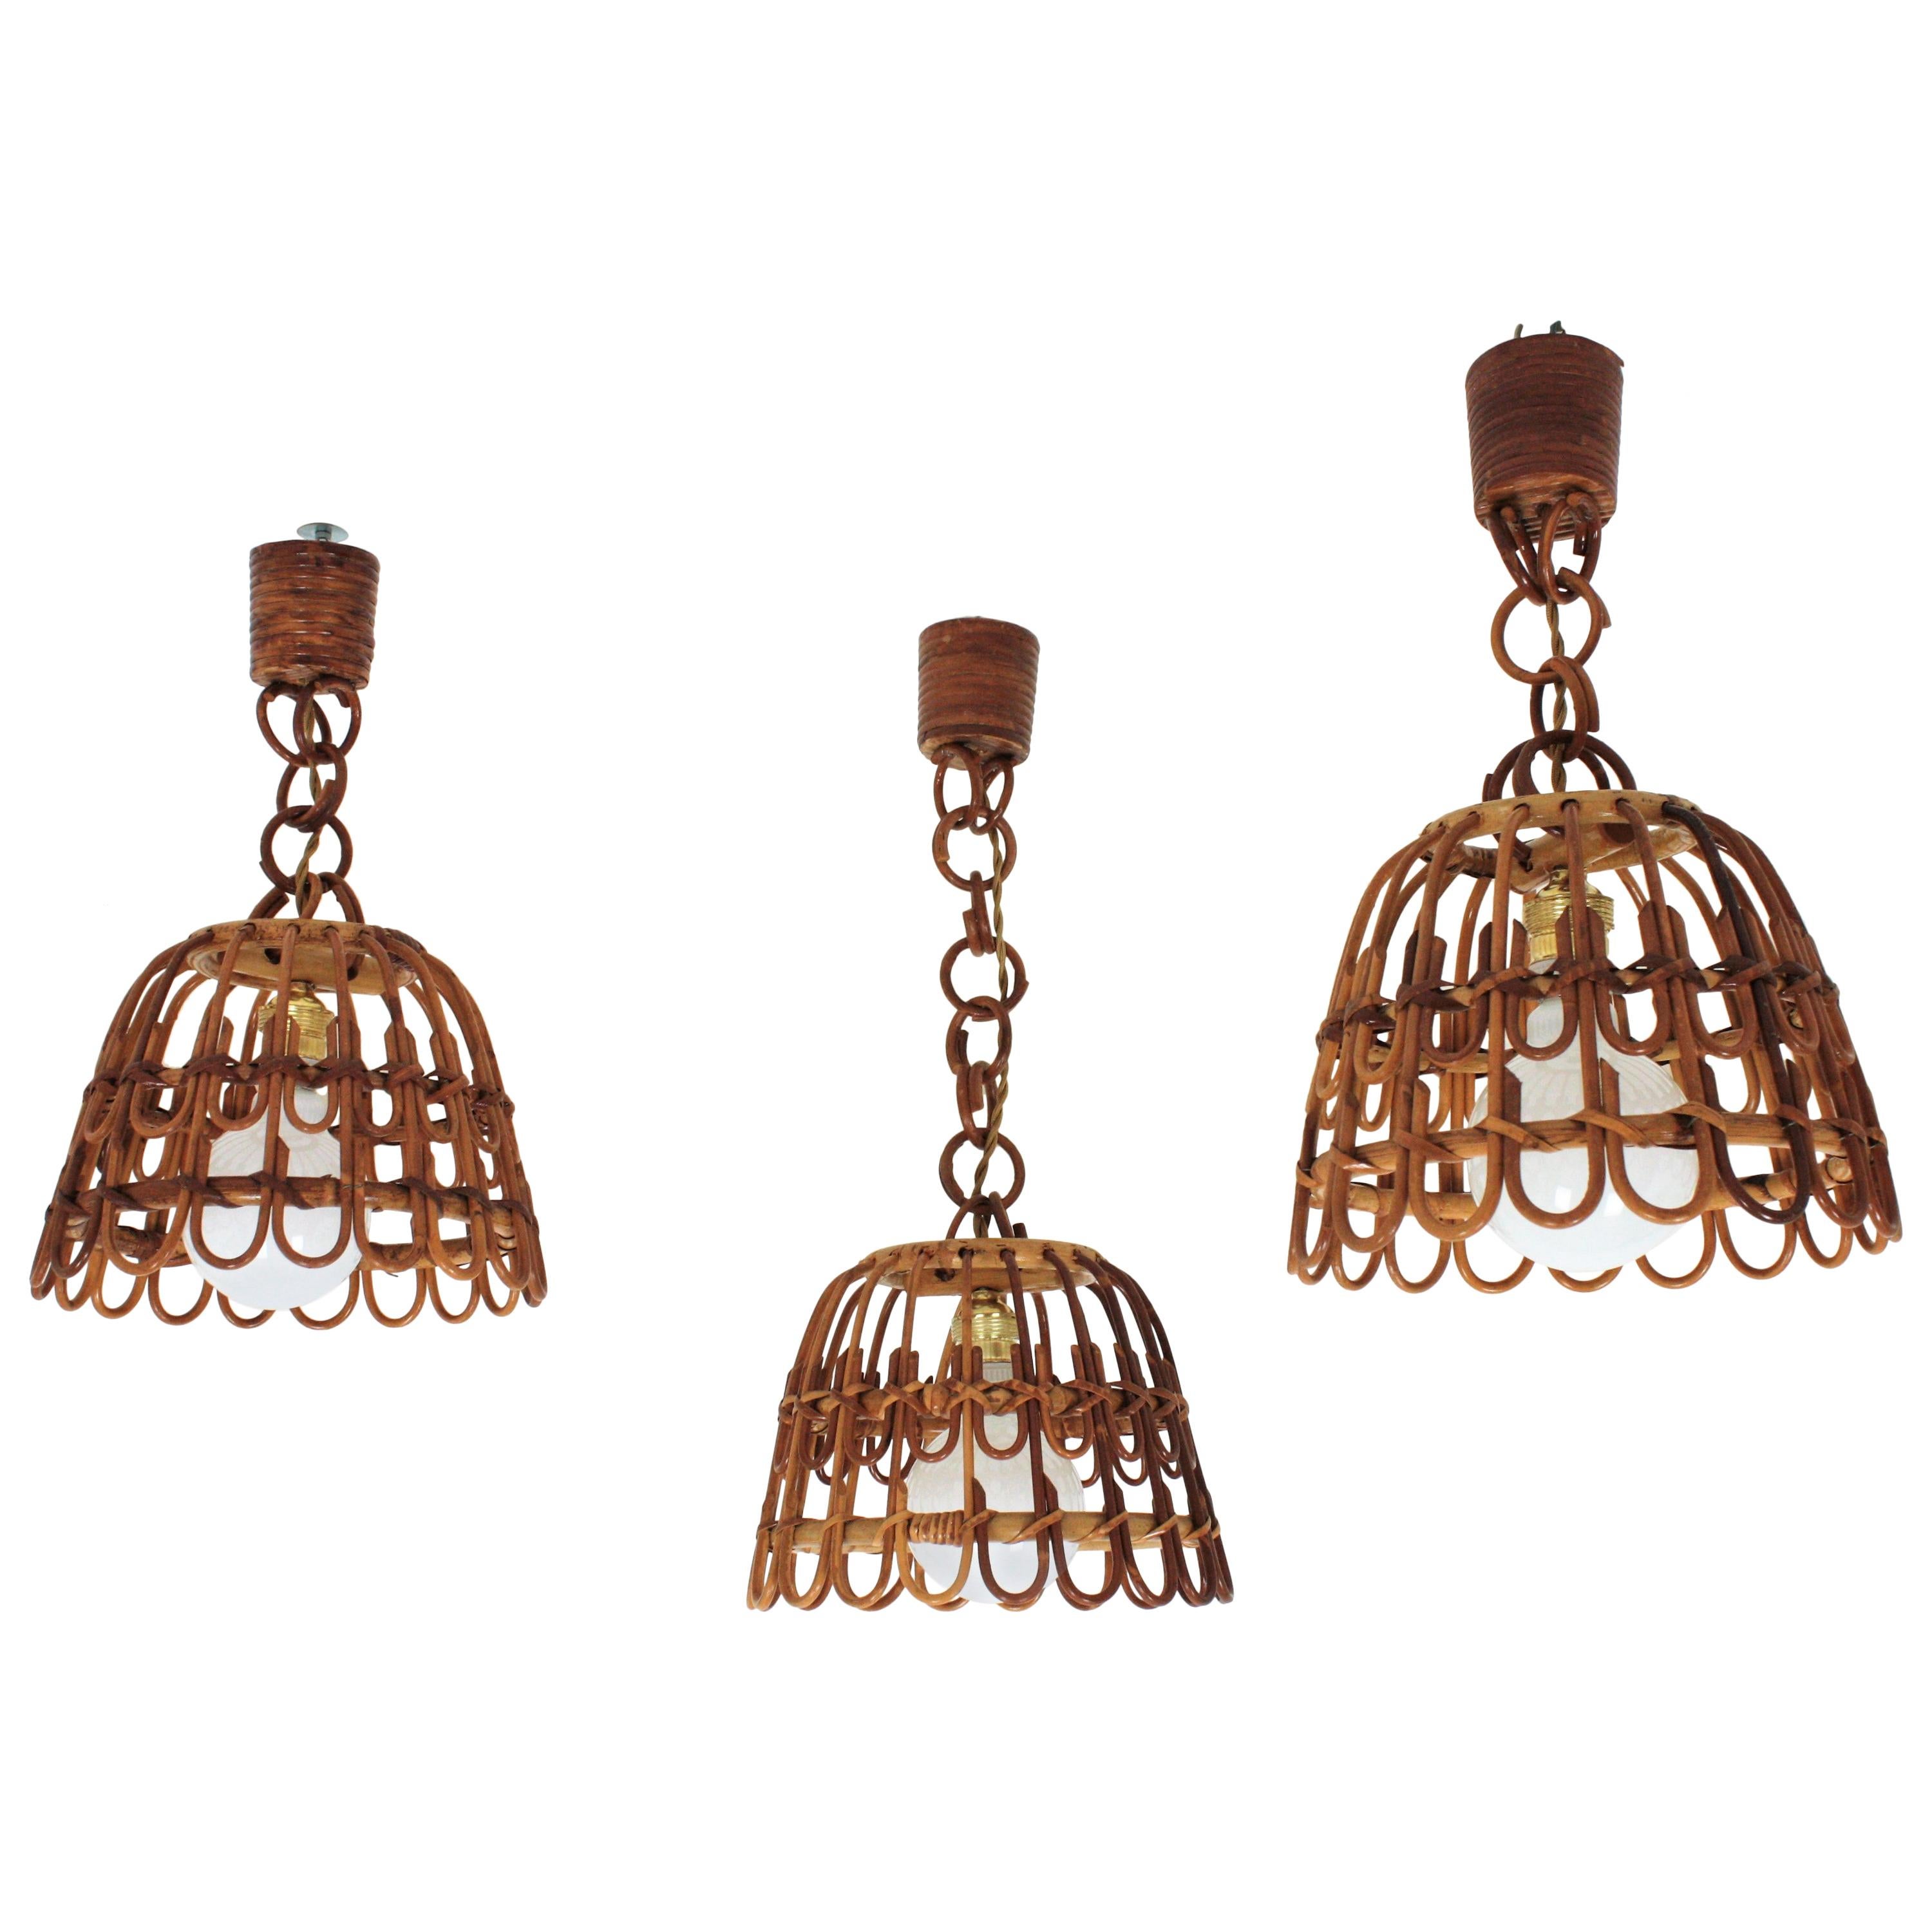 3 Spanish Rattan Bell Pendant Lights Ceiling Hanging Lamps For Sale